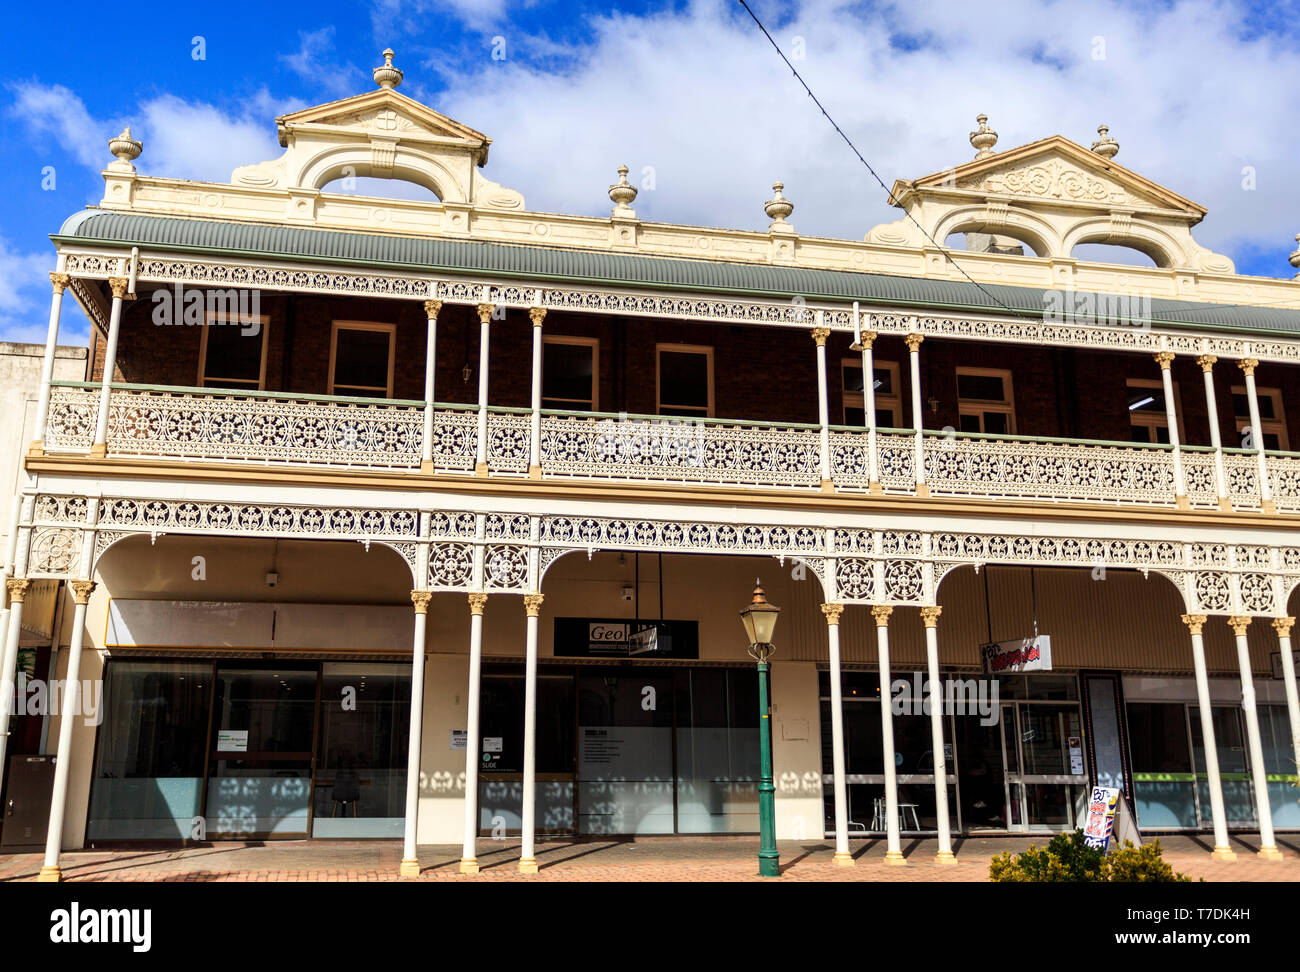 Detail of the heritage listed Imperial Hotel built in 1889 and ornamented with cast-iron friezework,  bullnose awnings and parapets with Grecian urns  Stock Photo